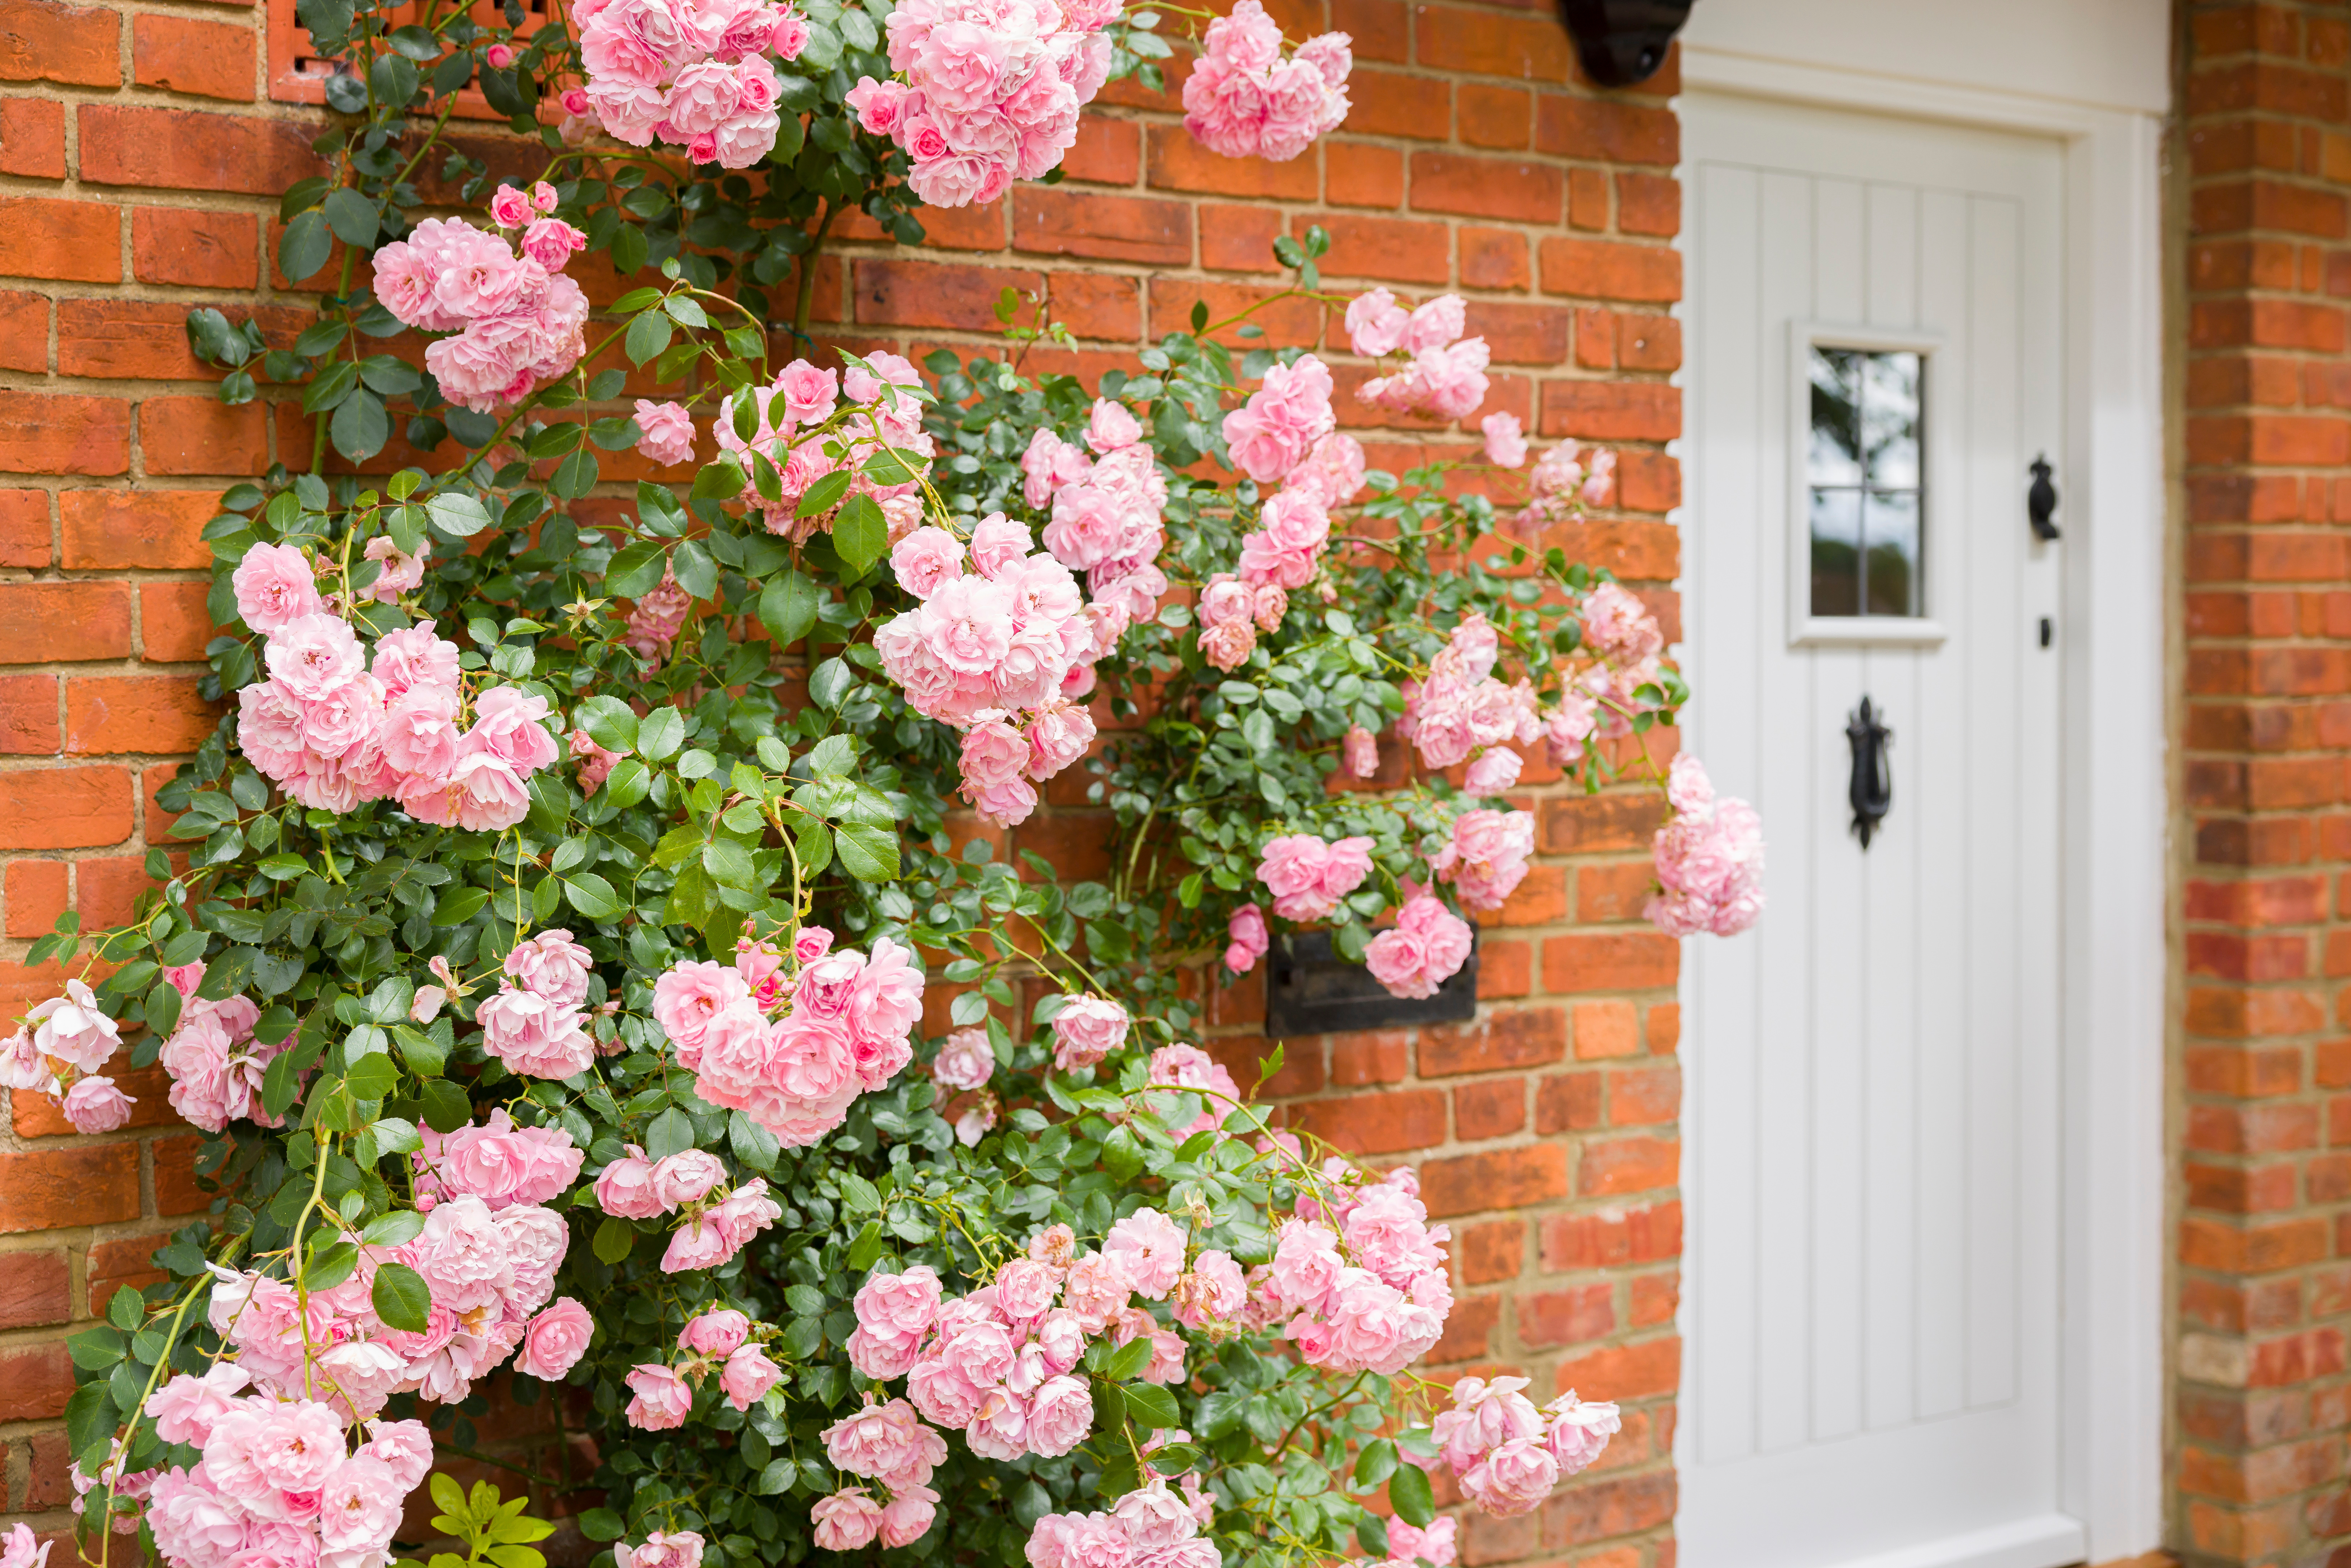 The weather in summer in the UK creates the best conditions to showcase the outside of your property